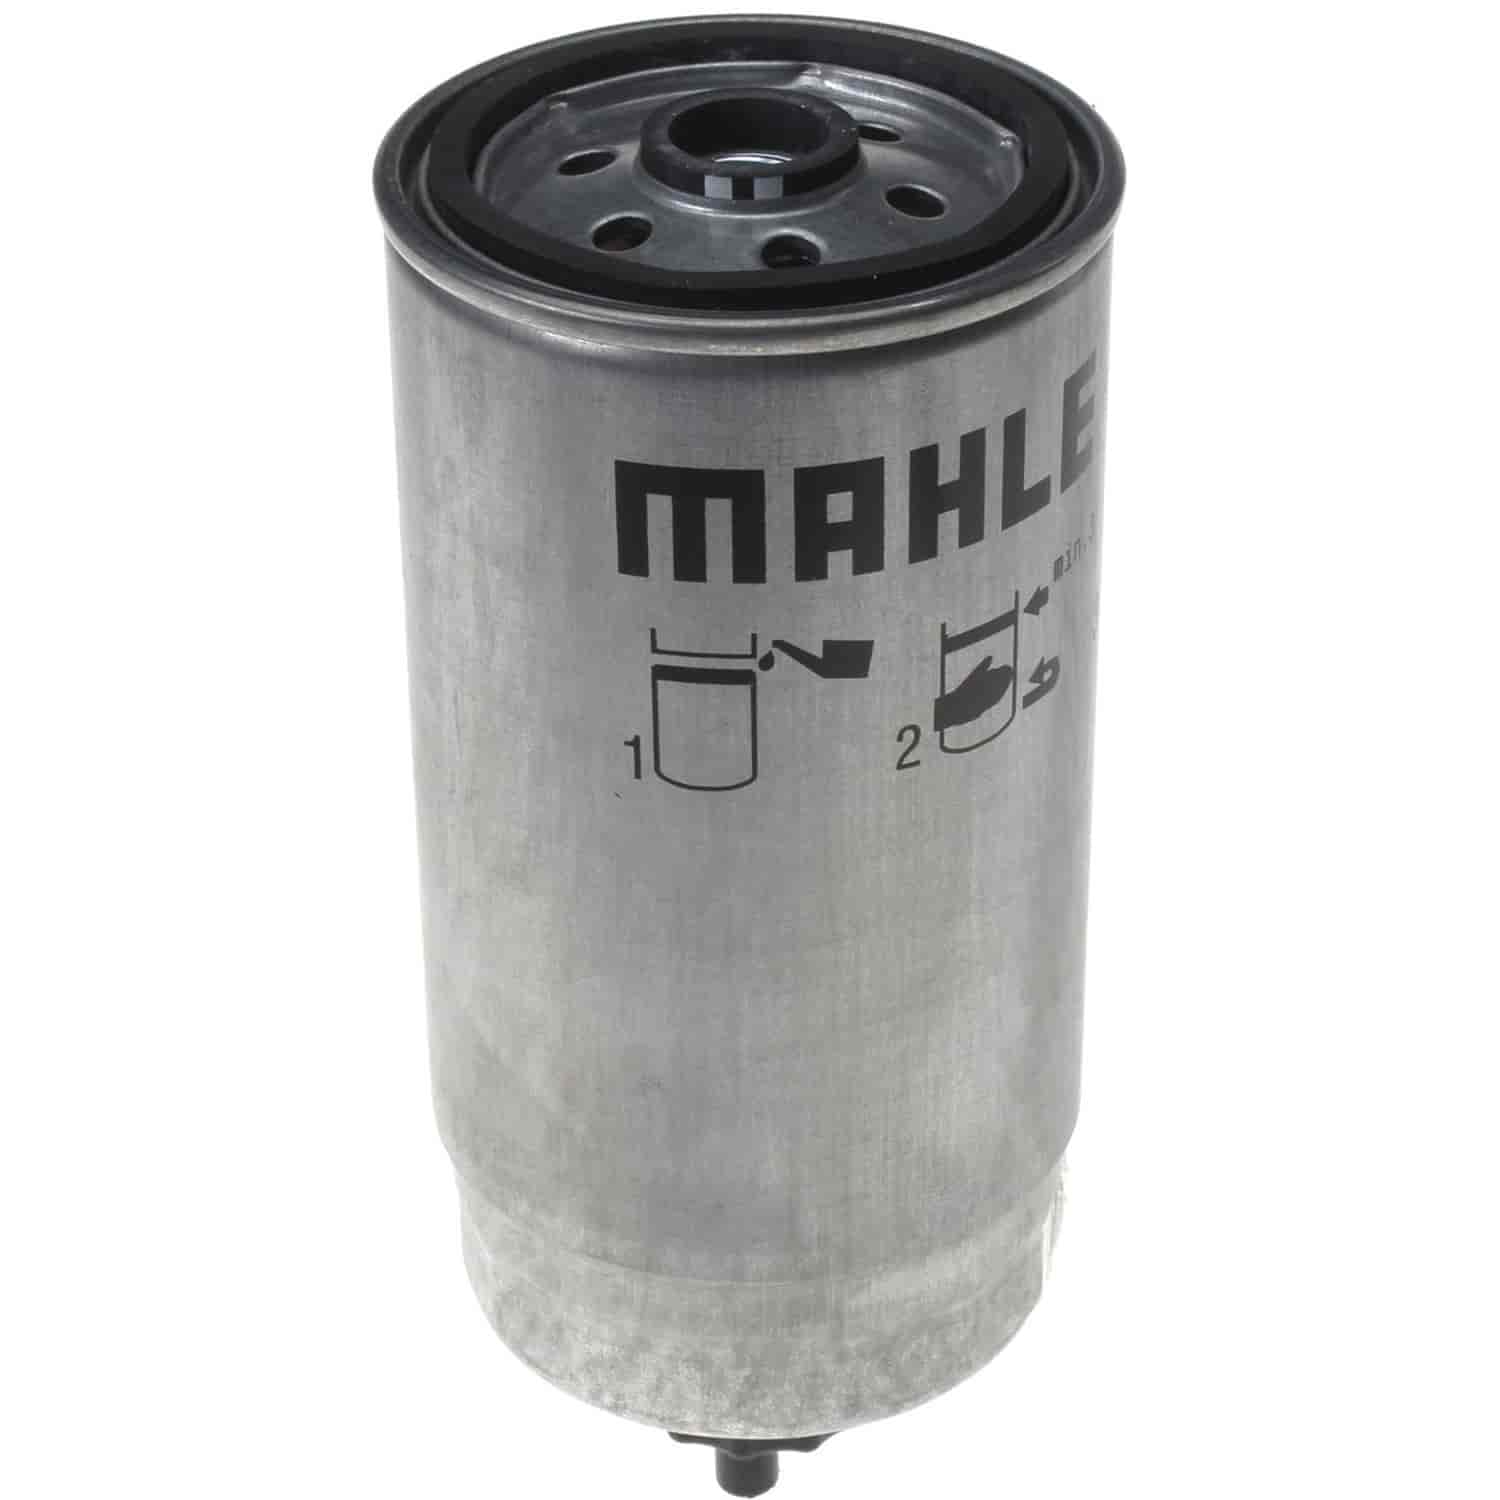 Mahle Fuel Filter Jeep Liberty 2.8L 171CID Diesel Turbo 2005-2006 Iveco Tractor P7010C